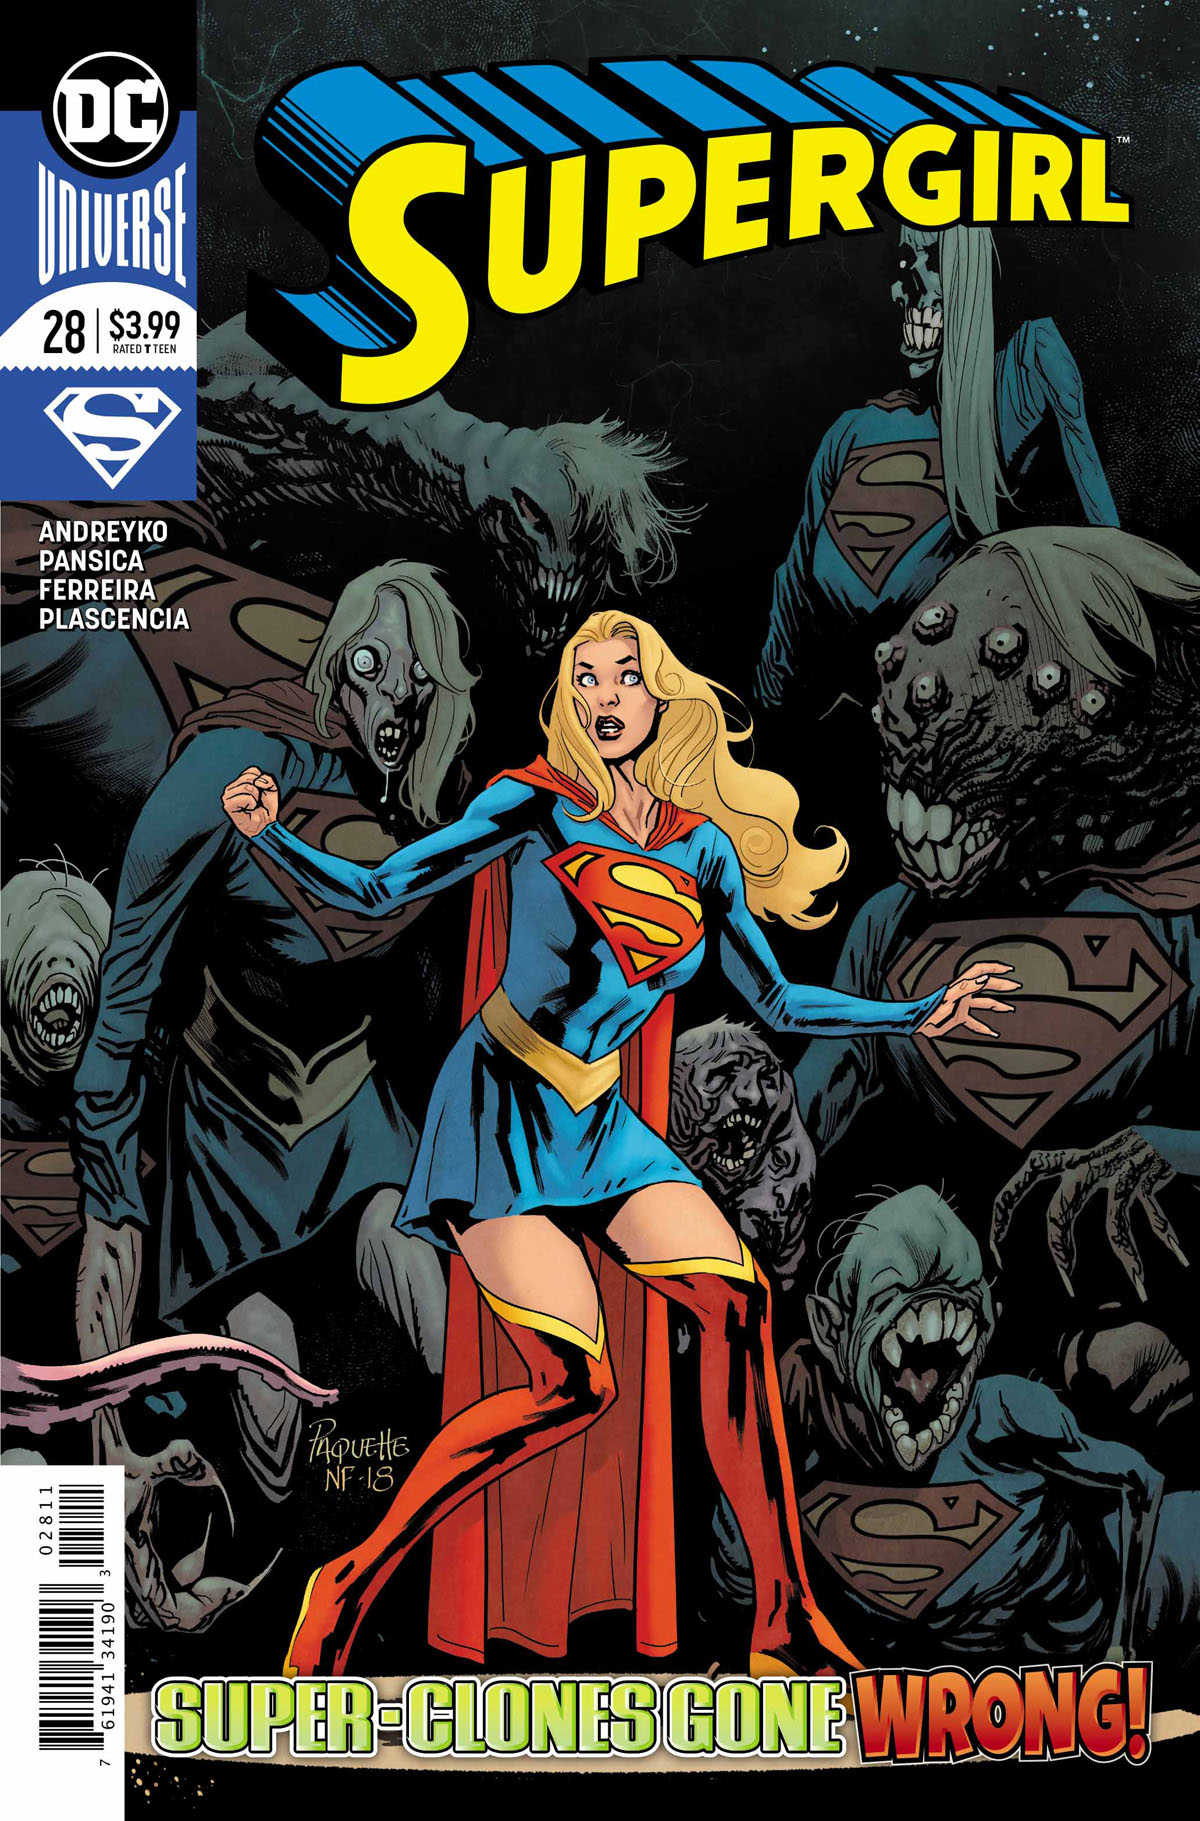 Supergirl #28 cover